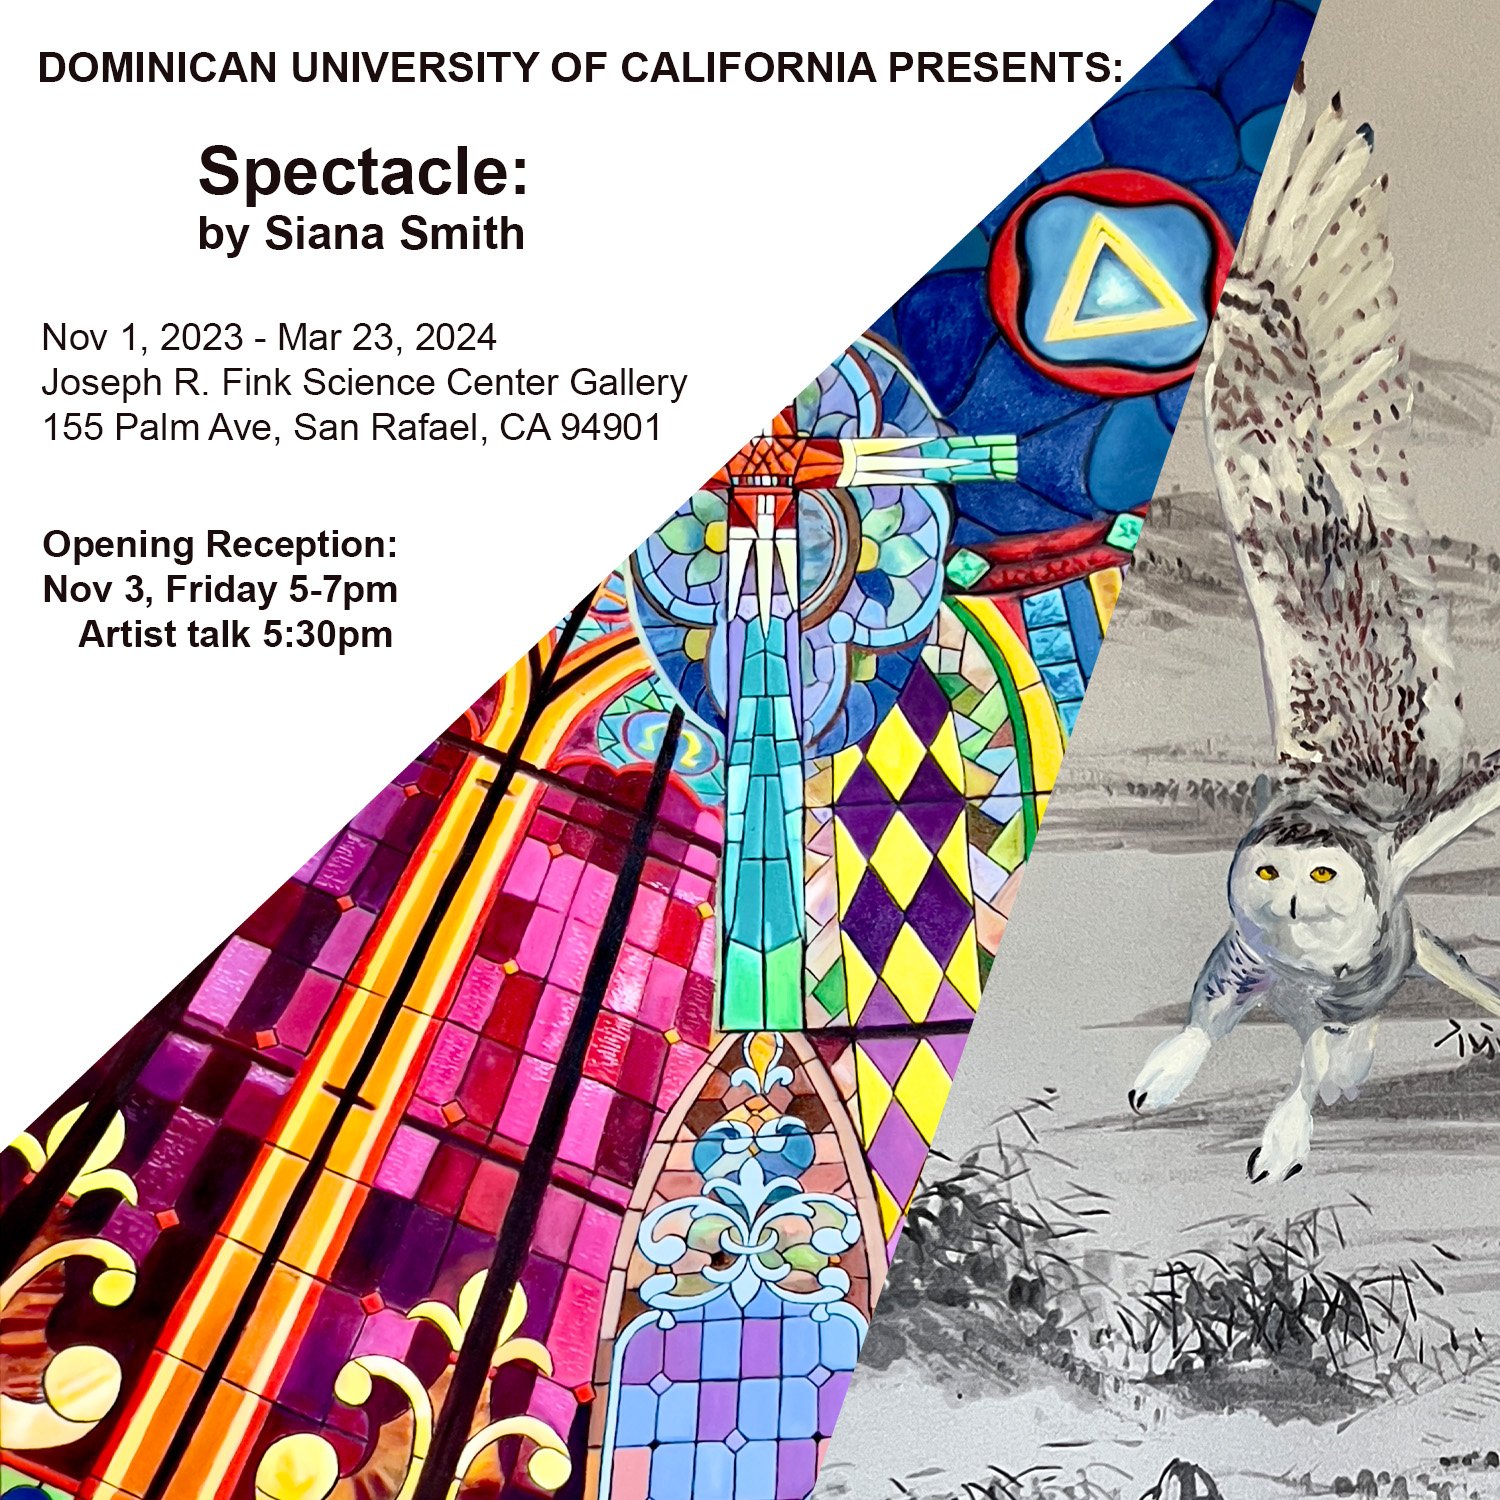 Solo exhibition "Spectacle", Dominican University of California